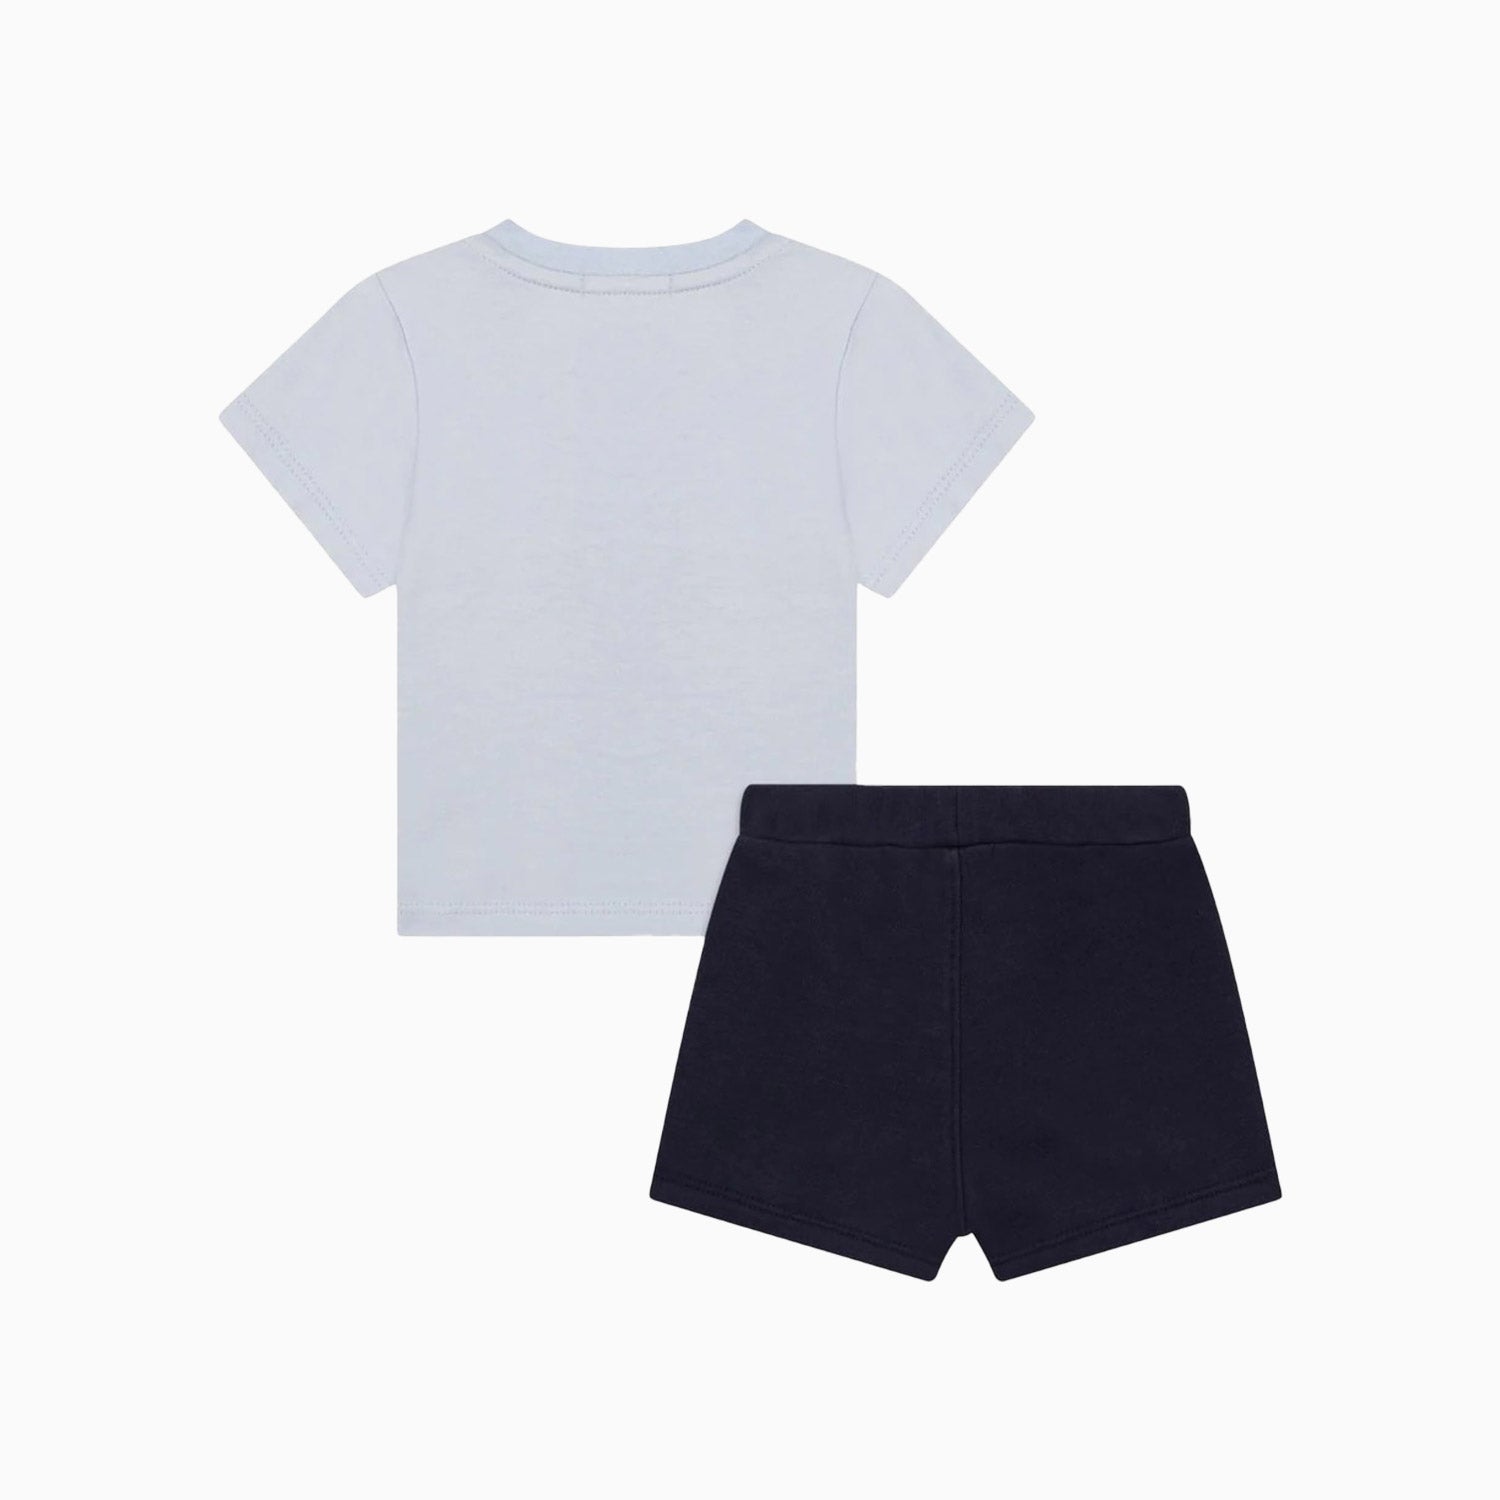 Hugo Boss Kid's T Shirt And Shorts Outfit Toddlers - Color: White, Pale Blue - Kids Premium Clothing -